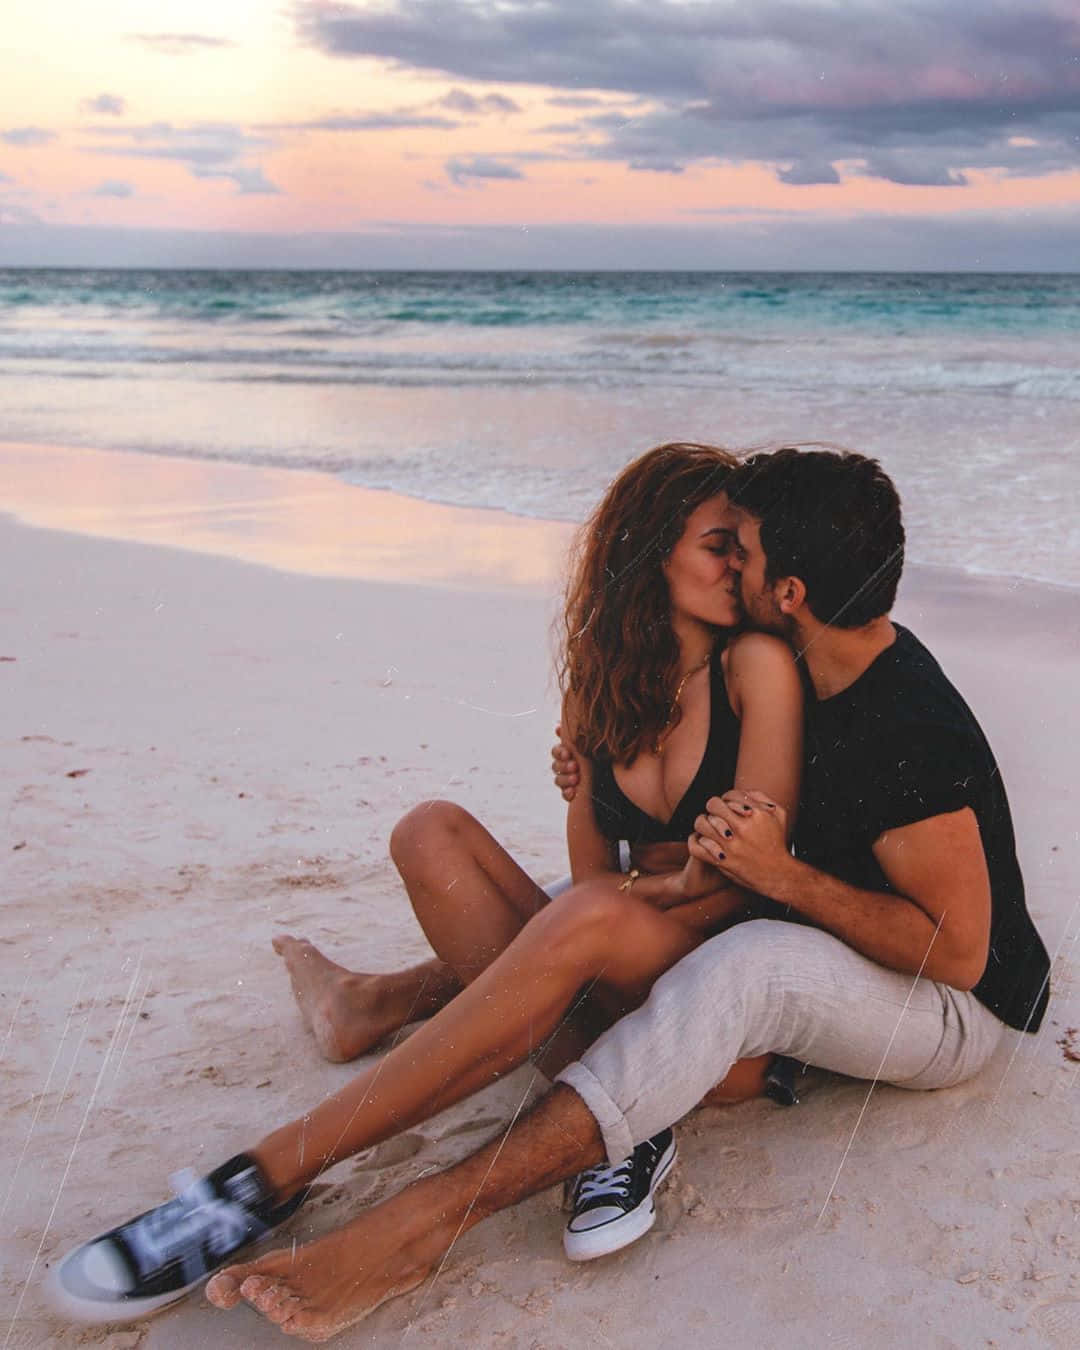 Download Relationship Cute Couple Kissing At Beach Pictures ...